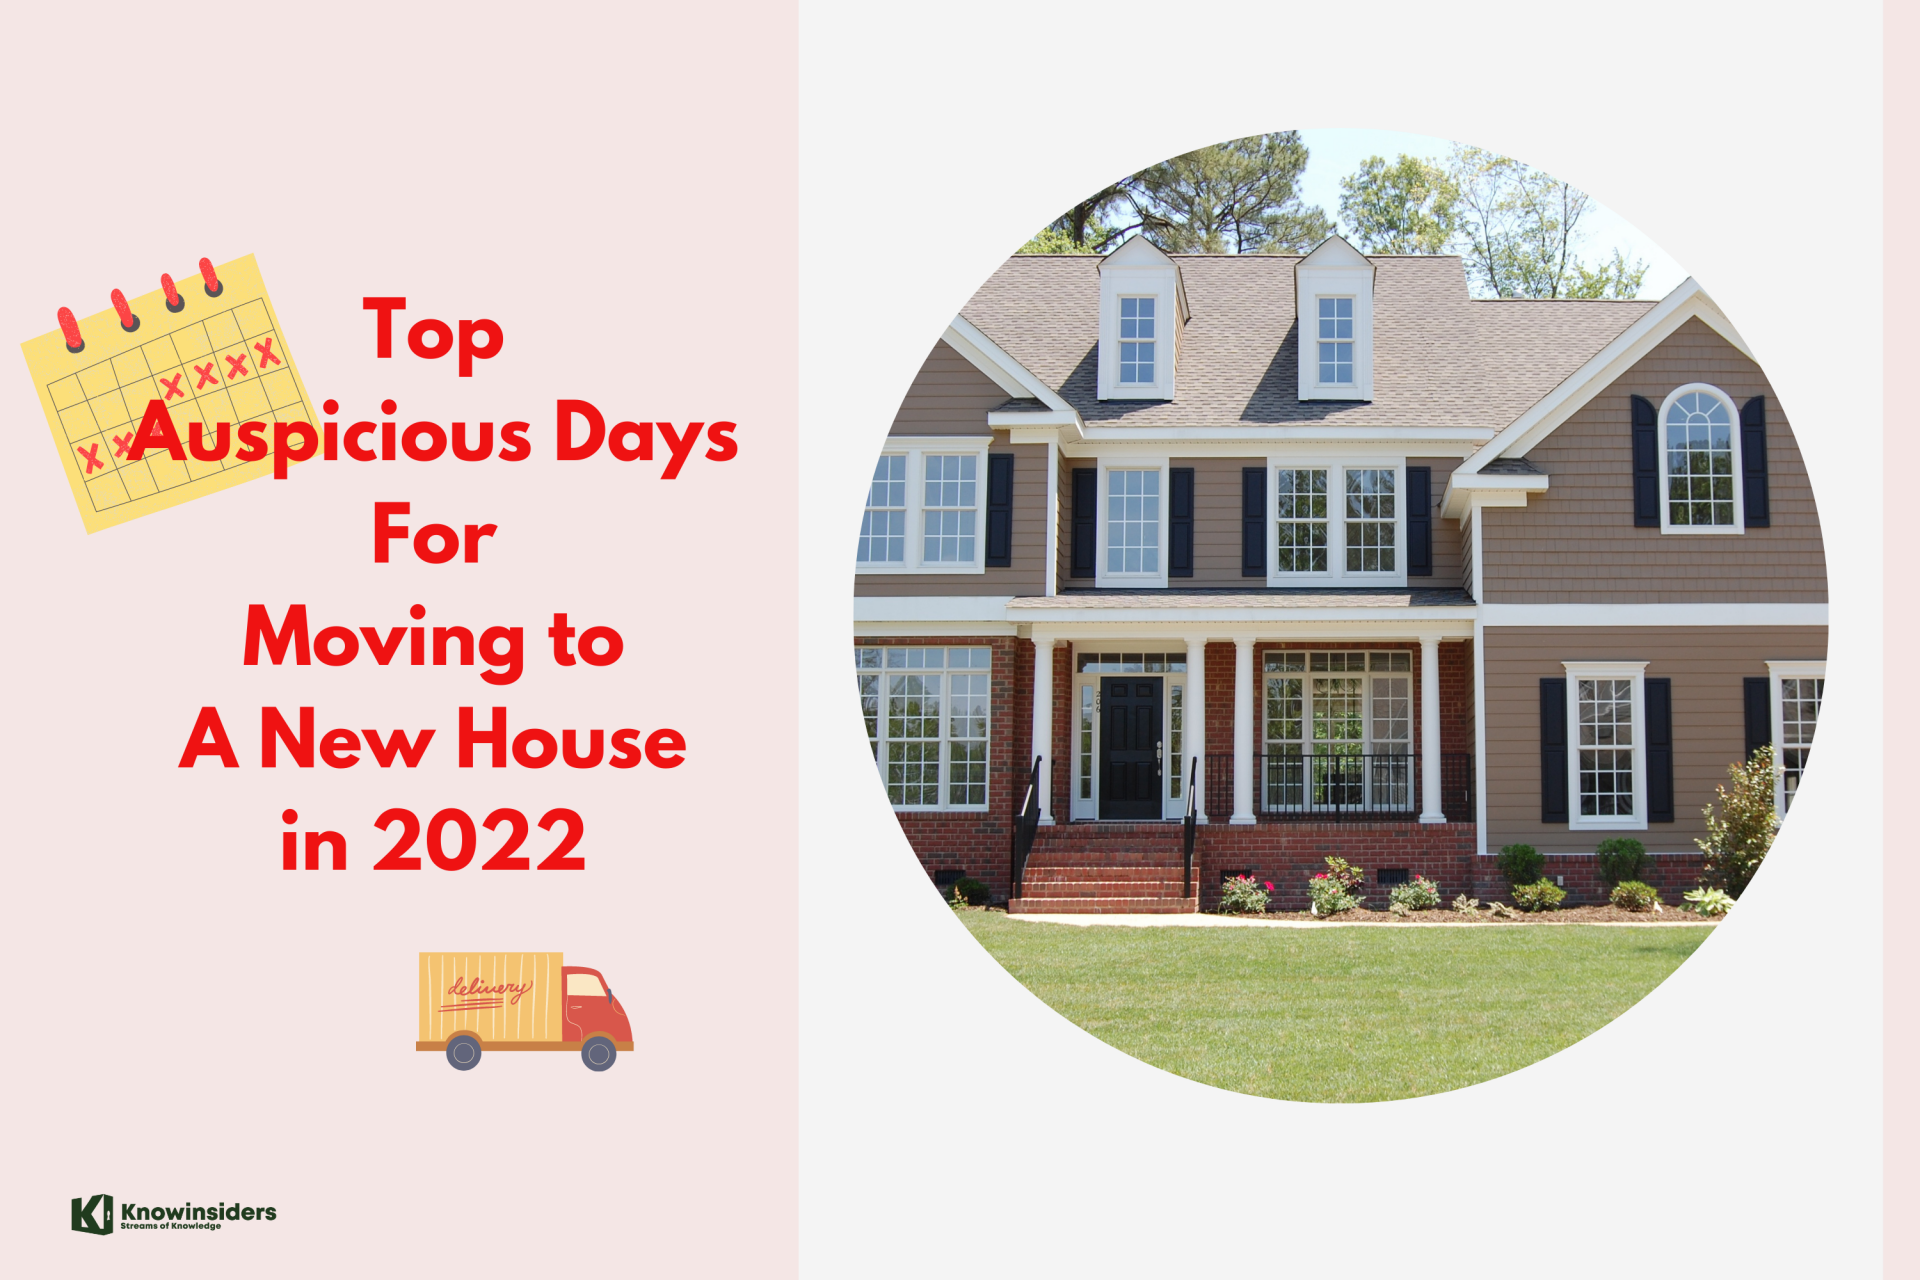 Top Auspicious Days For Moving to A New House in 2022